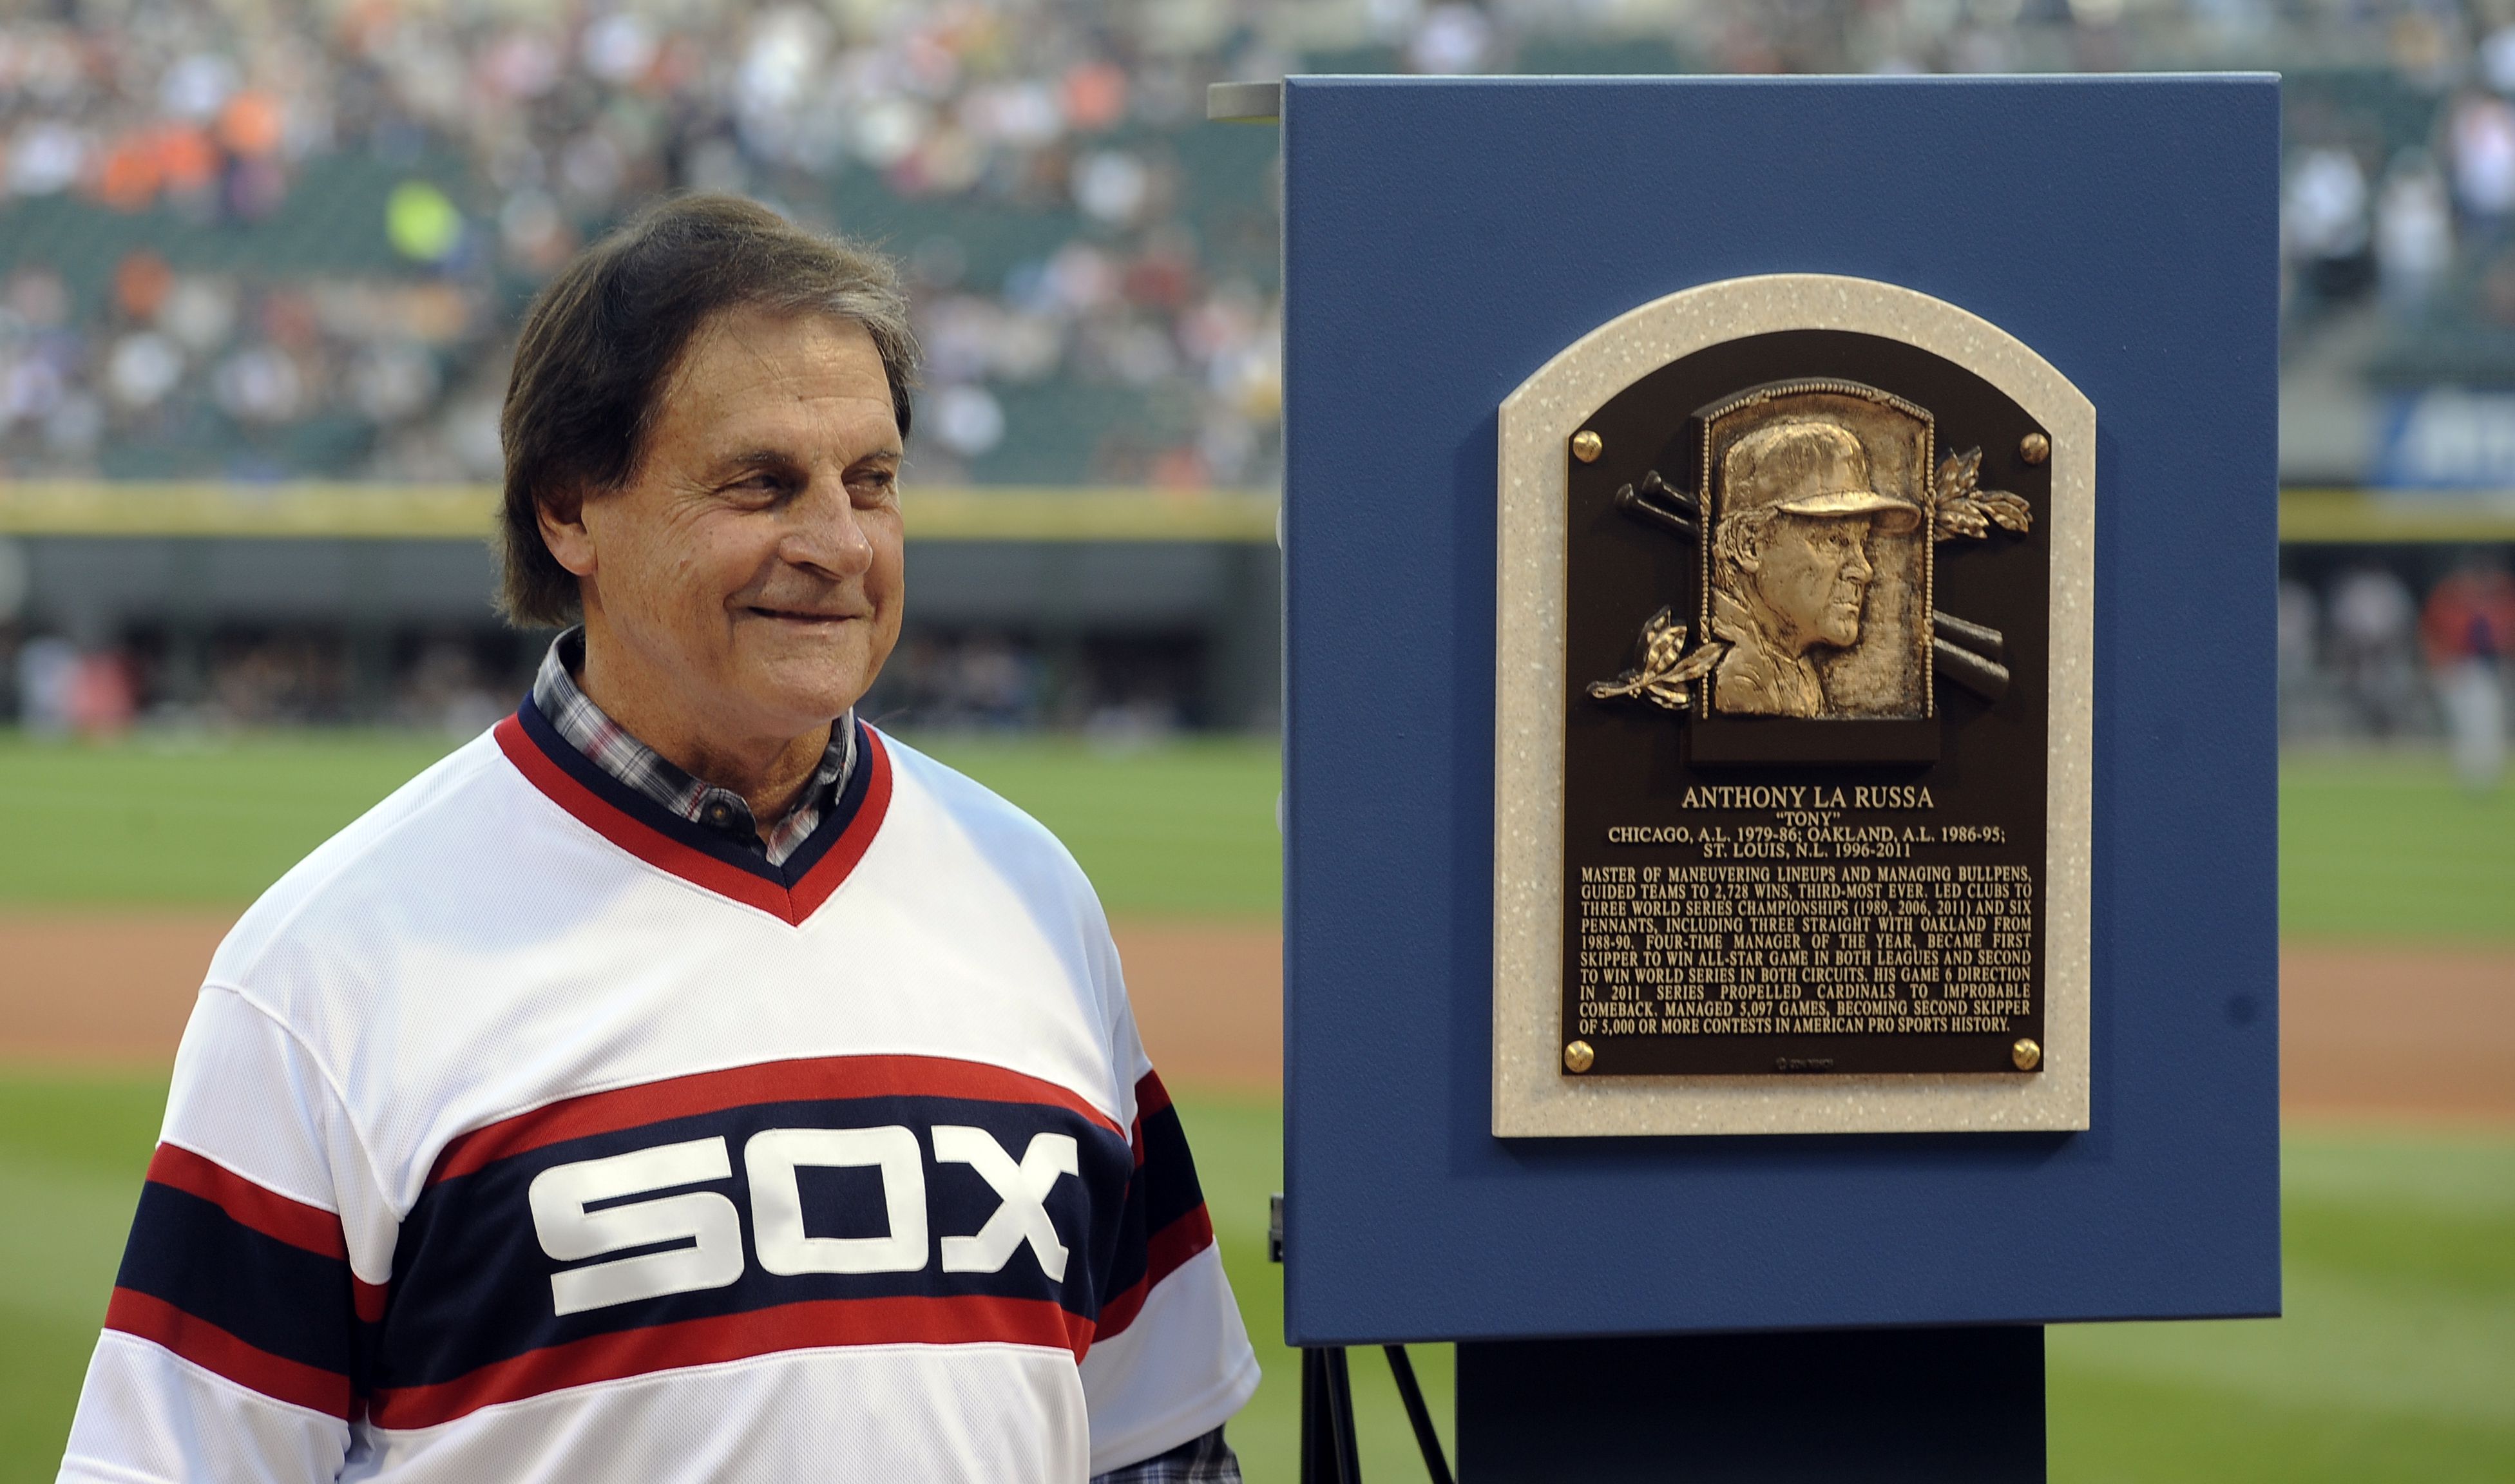 Ex-ace says Tony La Russa had White Sox using camera to steal